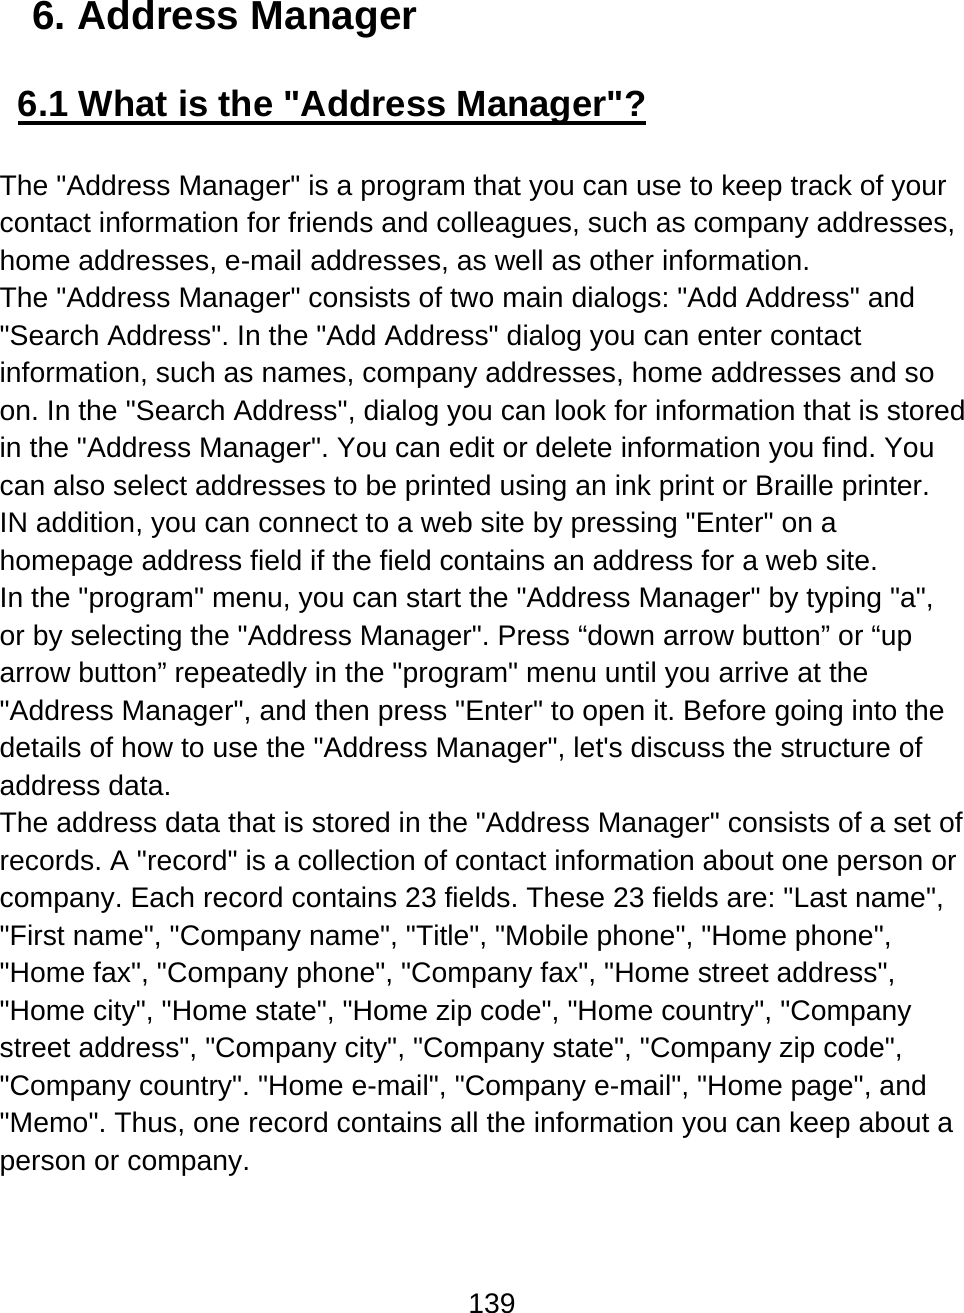 139  6. Address Manager  6.1 What is the &quot;Address Manager&quot;?  The &quot;Address Manager&quot; is a program that you can use to keep track of your contact information for friends and colleagues, such as company addresses, home addresses, e-mail addresses, as well as other information. The &quot;Address Manager&quot; consists of two main dialogs: &quot;Add Address&quot; and &quot;Search Address&quot;. In the &quot;Add Address&quot; dialog you can enter contact information, such as names, company addresses, home addresses and so on. In the &quot;Search Address&quot;, dialog you can look for information that is stored in the &quot;Address Manager&quot;. You can edit or delete information you find. You can also select addresses to be printed using an ink print or Braille printer. IN addition, you can connect to a web site by pressing &quot;Enter&quot; on a homepage address field if the field contains an address for a web site.  In the &quot;program&quot; menu, you can start the &quot;Address Manager&quot; by typing &quot;a&quot;, or by selecting the &quot;Address Manager&quot;. Press “down arrow button” or “up arrow button” repeatedly in the &quot;program&quot; menu until you arrive at the &quot;Address Manager&quot;, and then press &quot;Enter&quot; to open it. Before going into the details of how to use the &quot;Address Manager&quot;, let&apos;s discuss the structure of address data. The address data that is stored in the &quot;Address Manager&quot; consists of a set of records. A &quot;record&quot; is a collection of contact information about one person or company. Each record contains 23 fields. These 23 fields are: &quot;Last name&quot;, &quot;First name&quot;, &quot;Company name&quot;, &quot;Title&quot;, &quot;Mobile phone&quot;, &quot;Home phone&quot;, &quot;Home fax&quot;, &quot;Company phone&quot;, &quot;Company fax&quot;, &quot;Home street address&quot;, &quot;Home city&quot;, &quot;Home state&quot;, &quot;Home zip code&quot;, &quot;Home country&quot;, &quot;Company street address&quot;, &quot;Company city&quot;, &quot;Company state&quot;, &quot;Company zip code&quot;, &quot;Company country&quot;. &quot;Home e-mail&quot;, &quot;Company e-mail&quot;, &quot;Home page&quot;, and &quot;Memo&quot;. Thus, one record contains all the information you can keep about a person or company.  